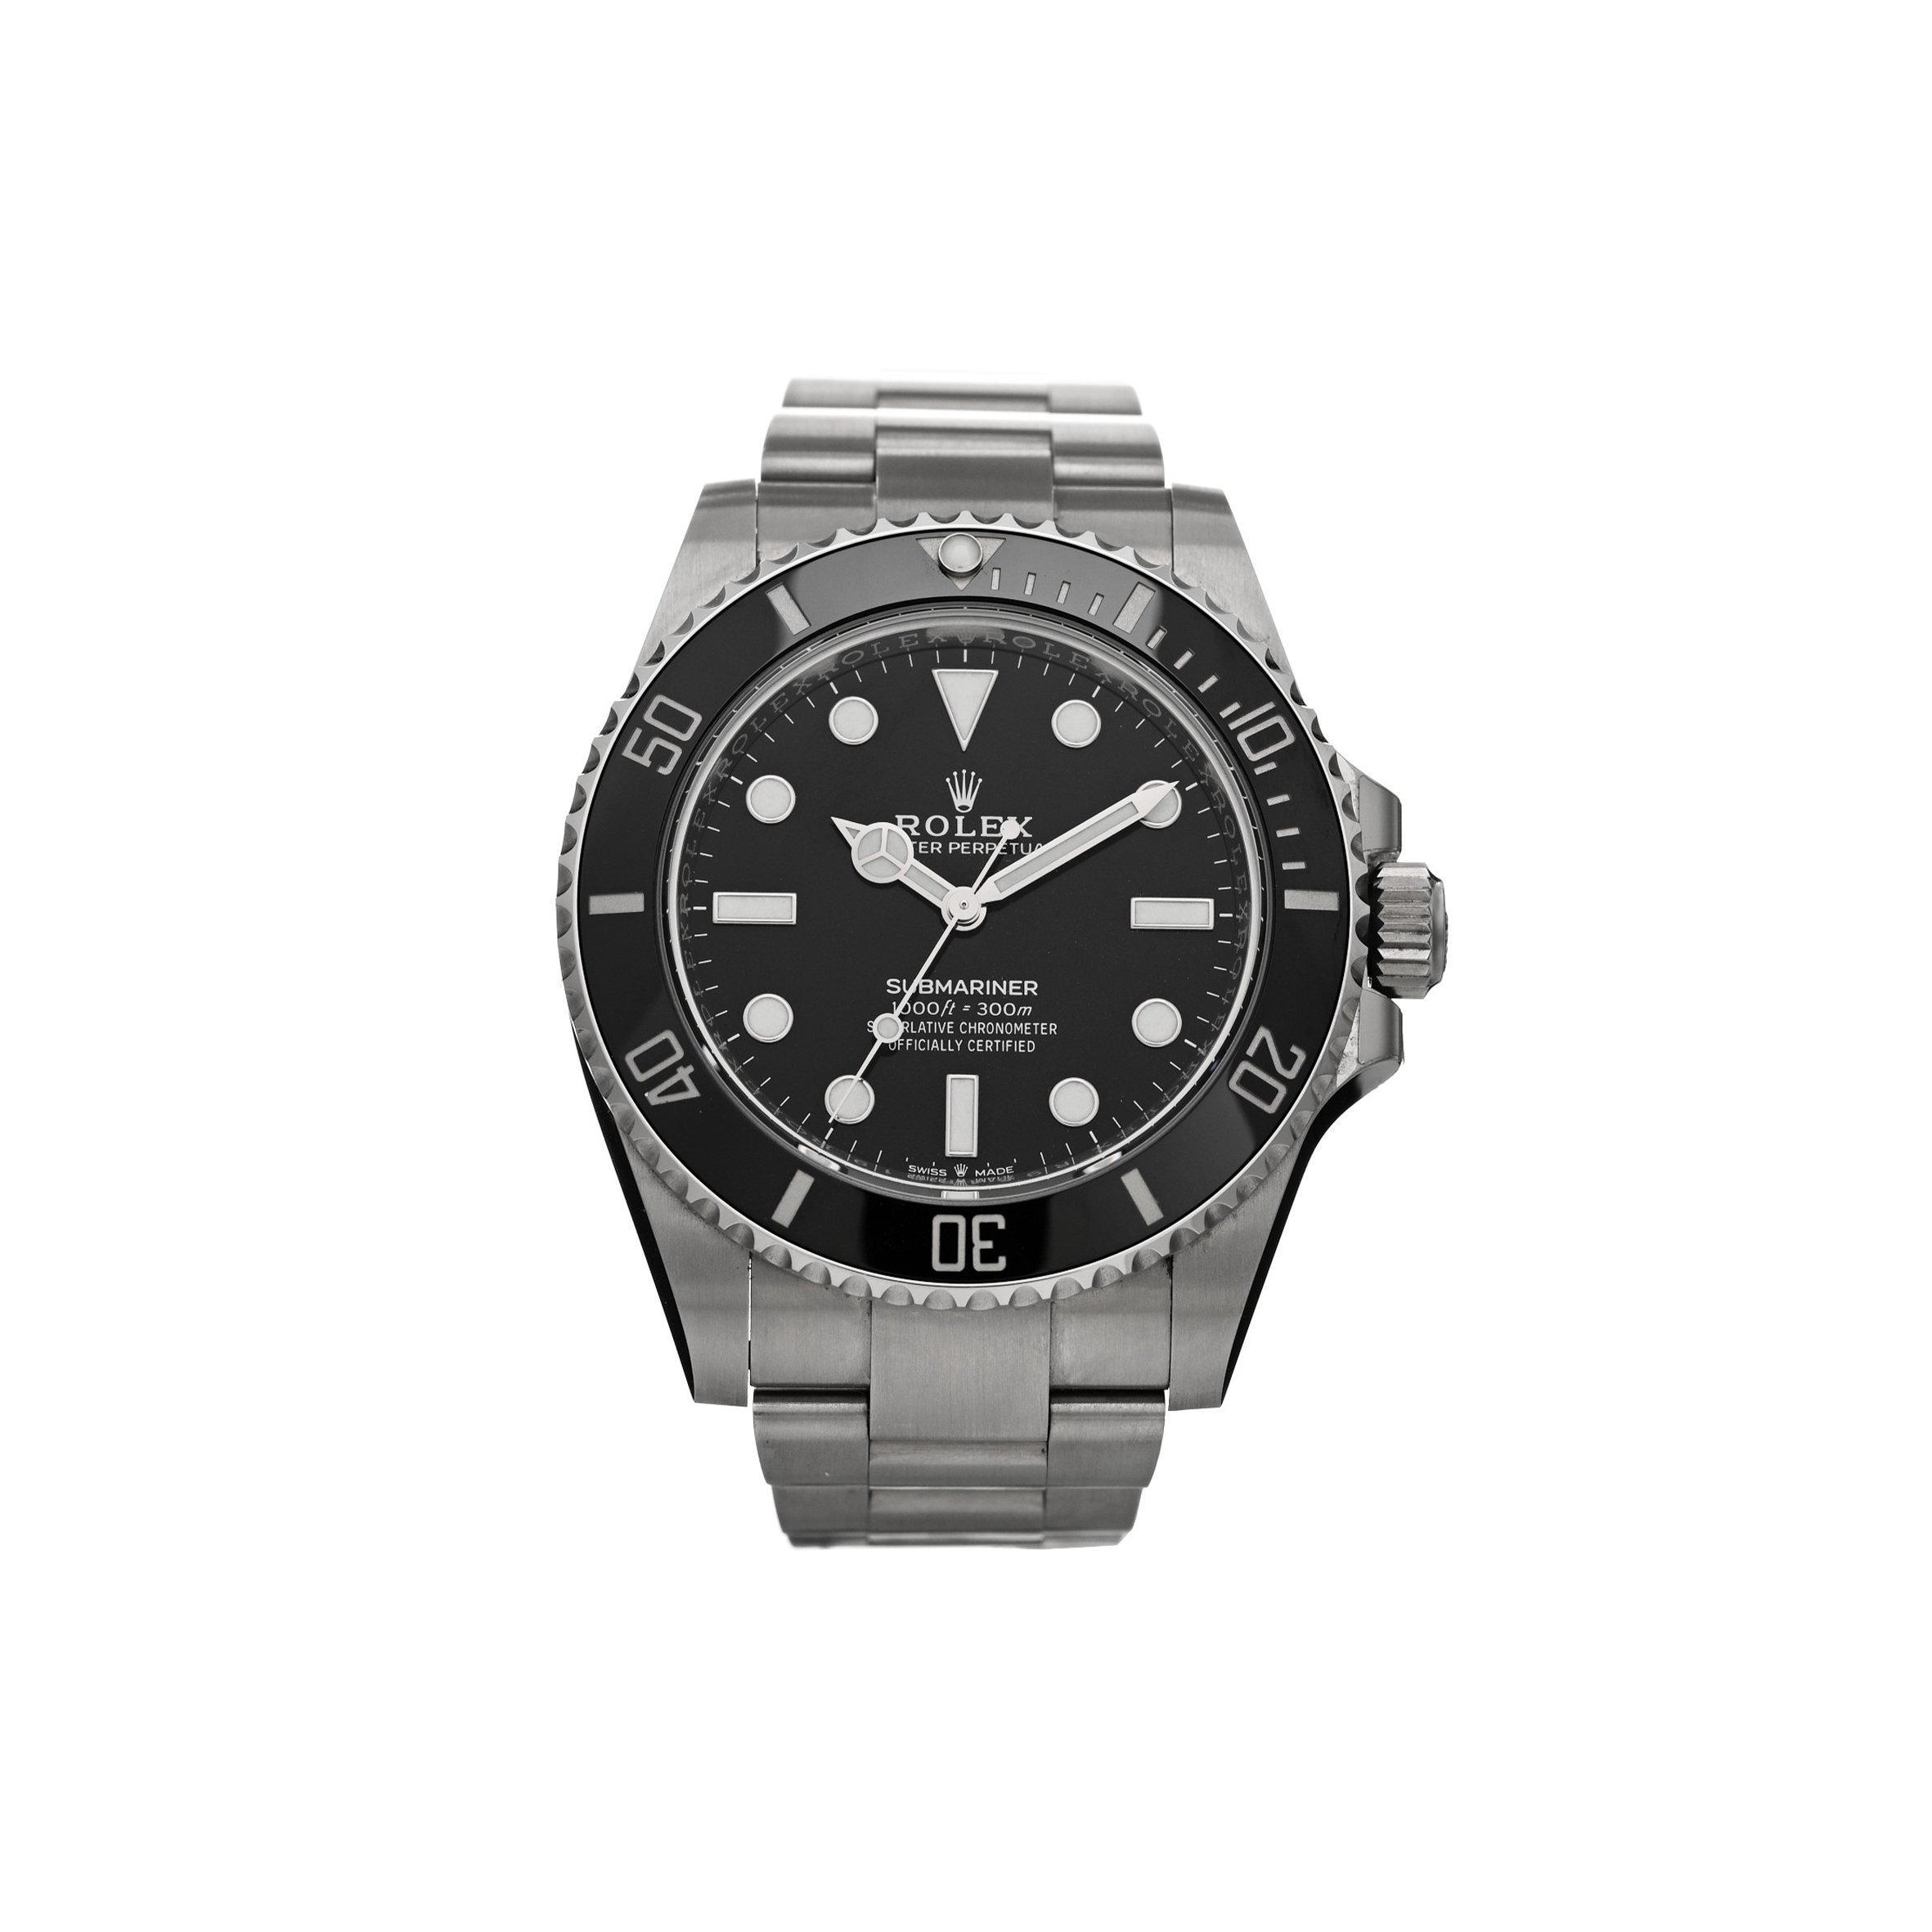 ROLEX STAINLESS STEEL 41MM OYSTER PERPETUAL SUBMARINER WATCH BLACK 124060